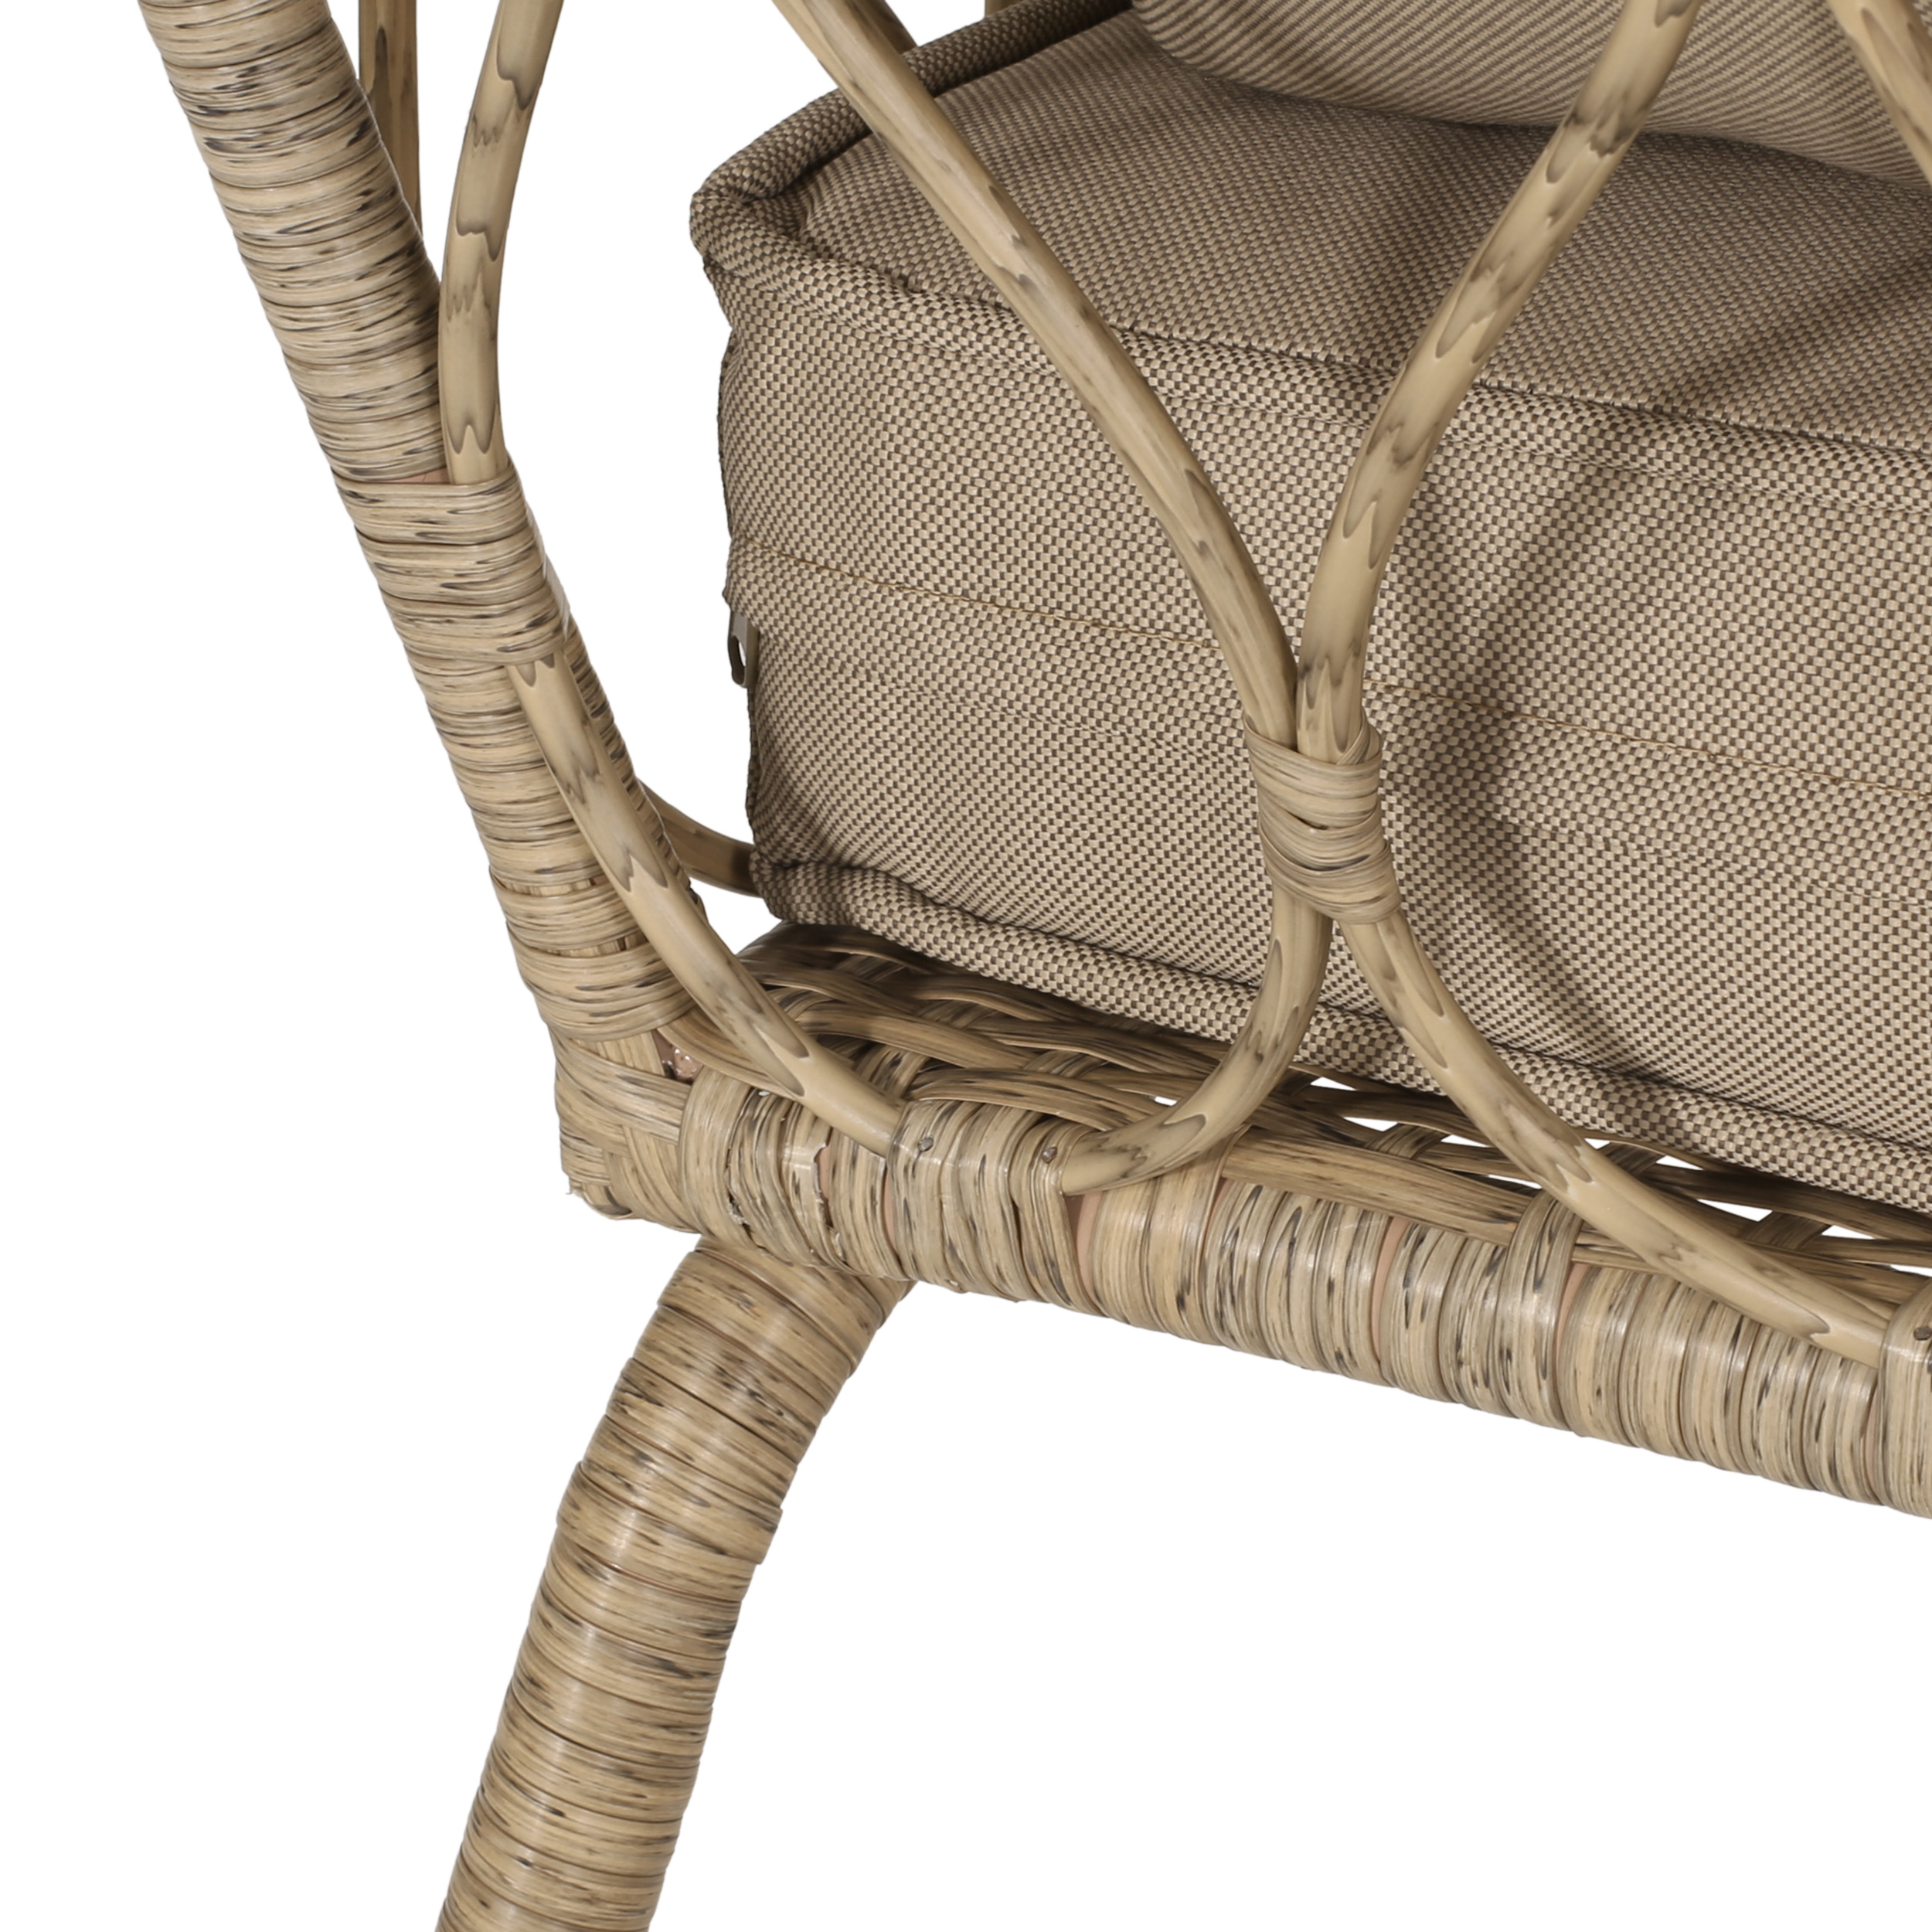 GDF Studio Colmar Outdoor Wicker 3 Piece Chat Set with Cushions, Light Brown and Beige - image 2 of 8